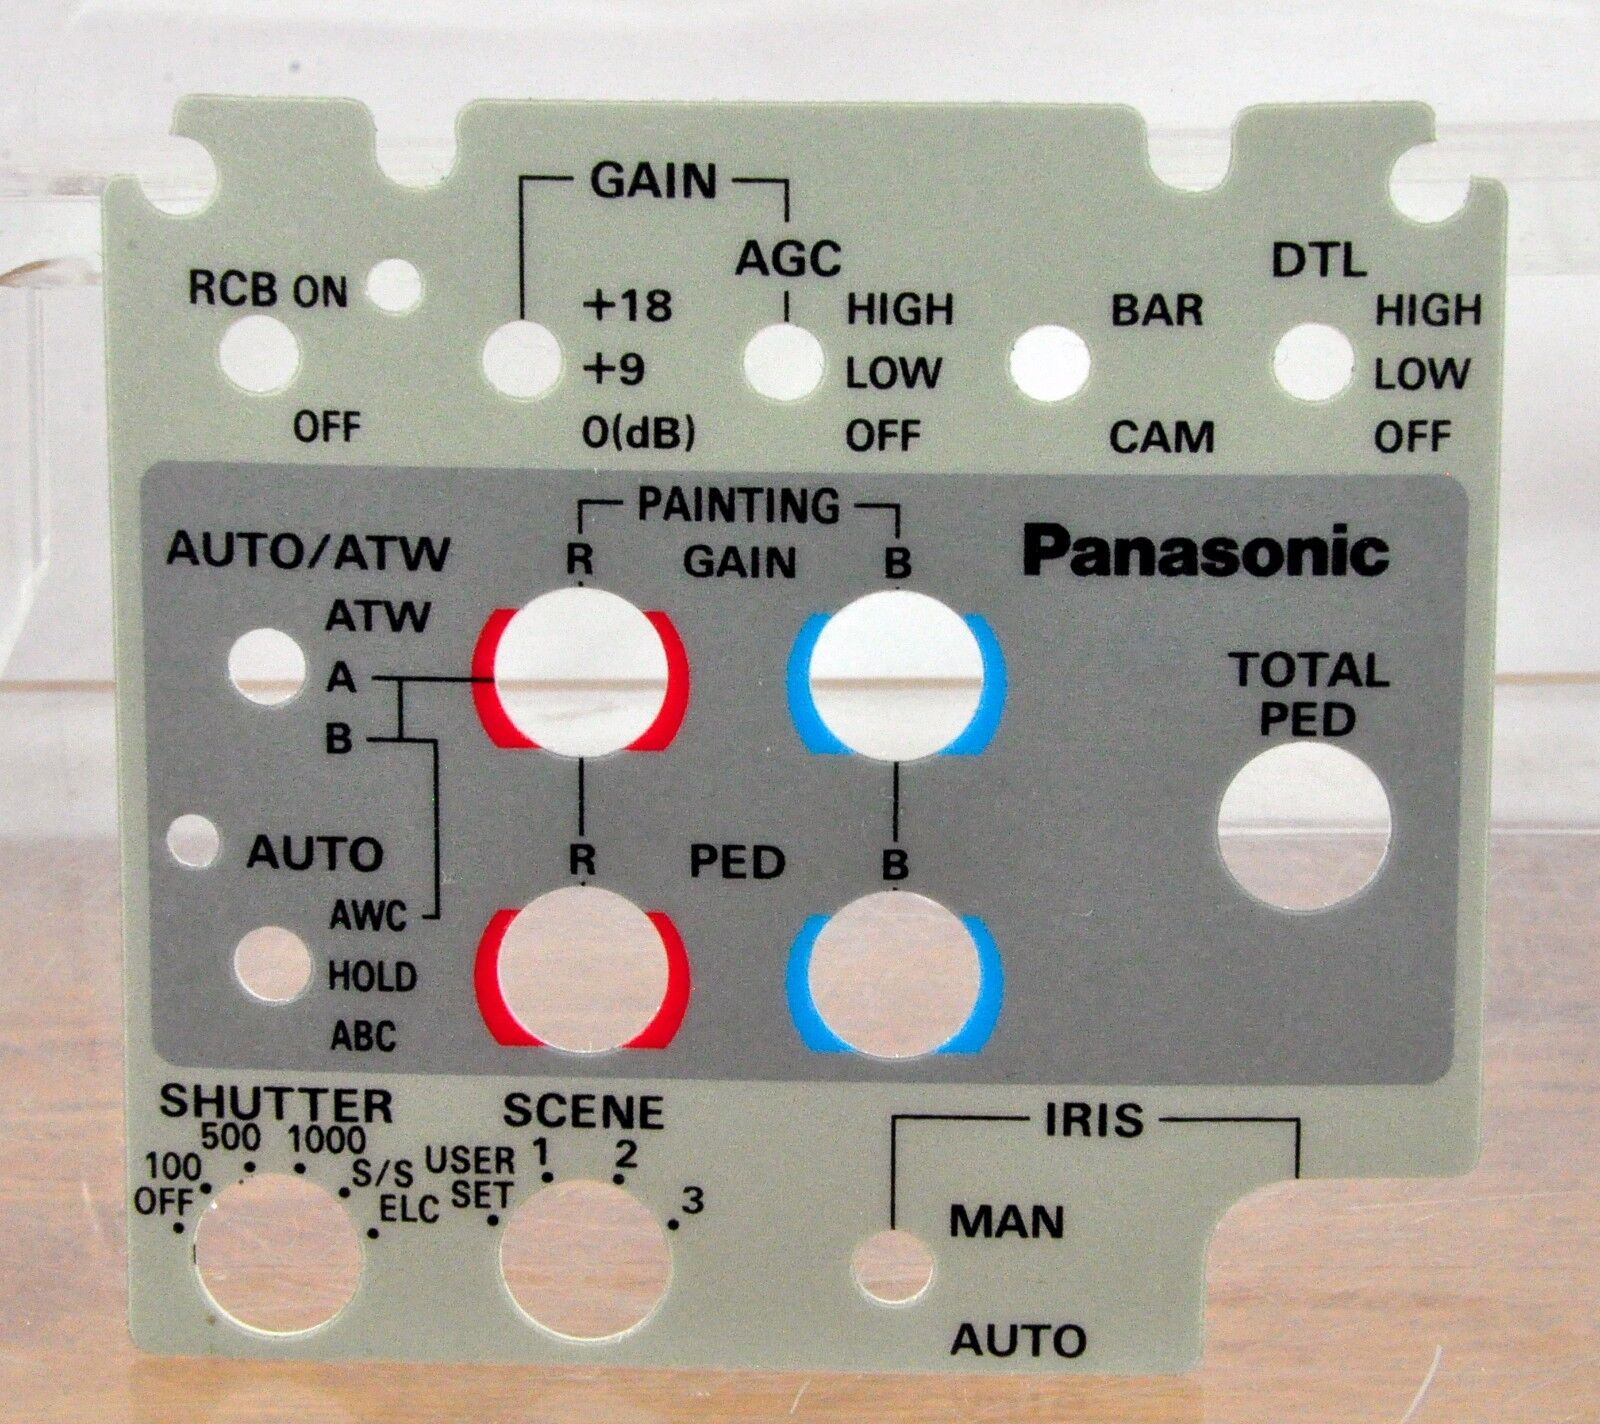 Replacement Control Sticker For Panasonic Remote Unit Wv-rc700 Or Wv-cb700 (v.2)